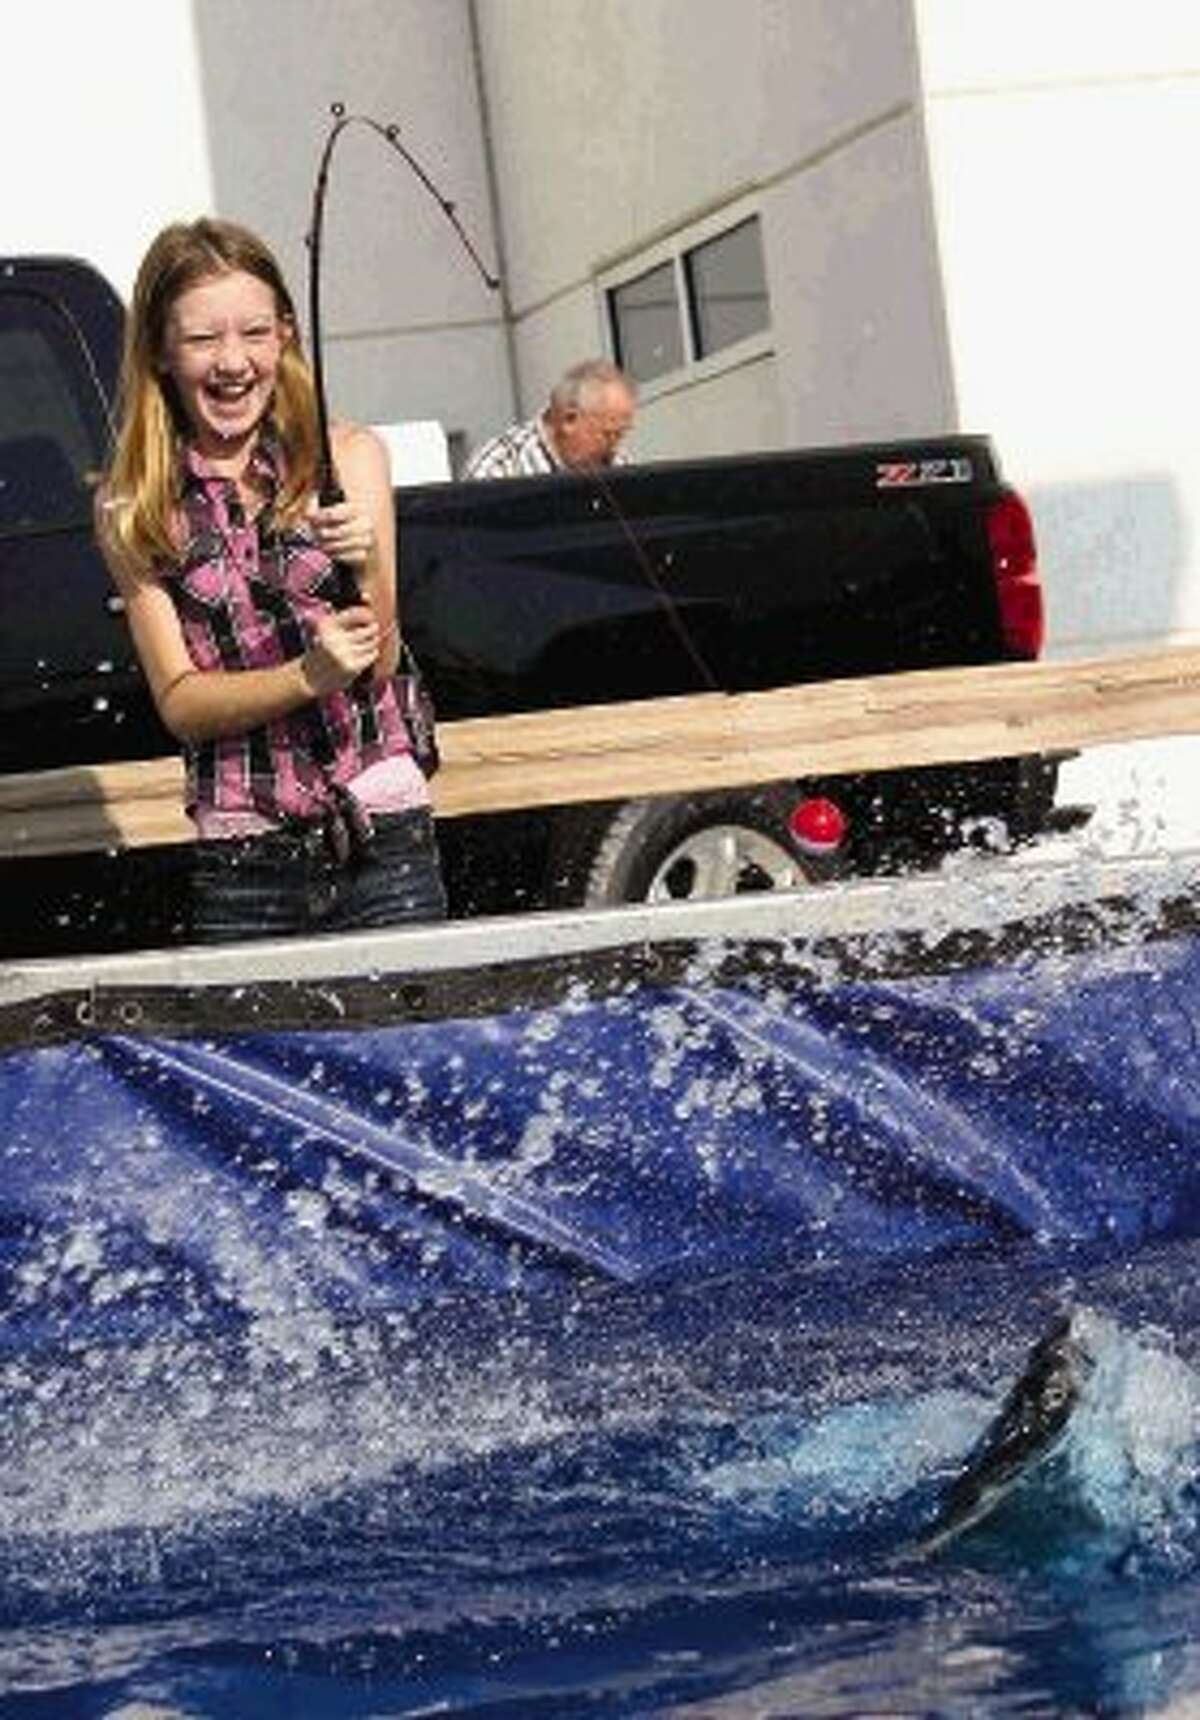 Brittany Buttler catches a catfish at the “Hooked on Chevy” event at Buckalew Chevrolet in Conroe Saturday. Children fished for catfish and earned T-shirts and tackle boxes for the number of fish they caught. Go to HCNPics.com to view and purchase this photo and others like it.